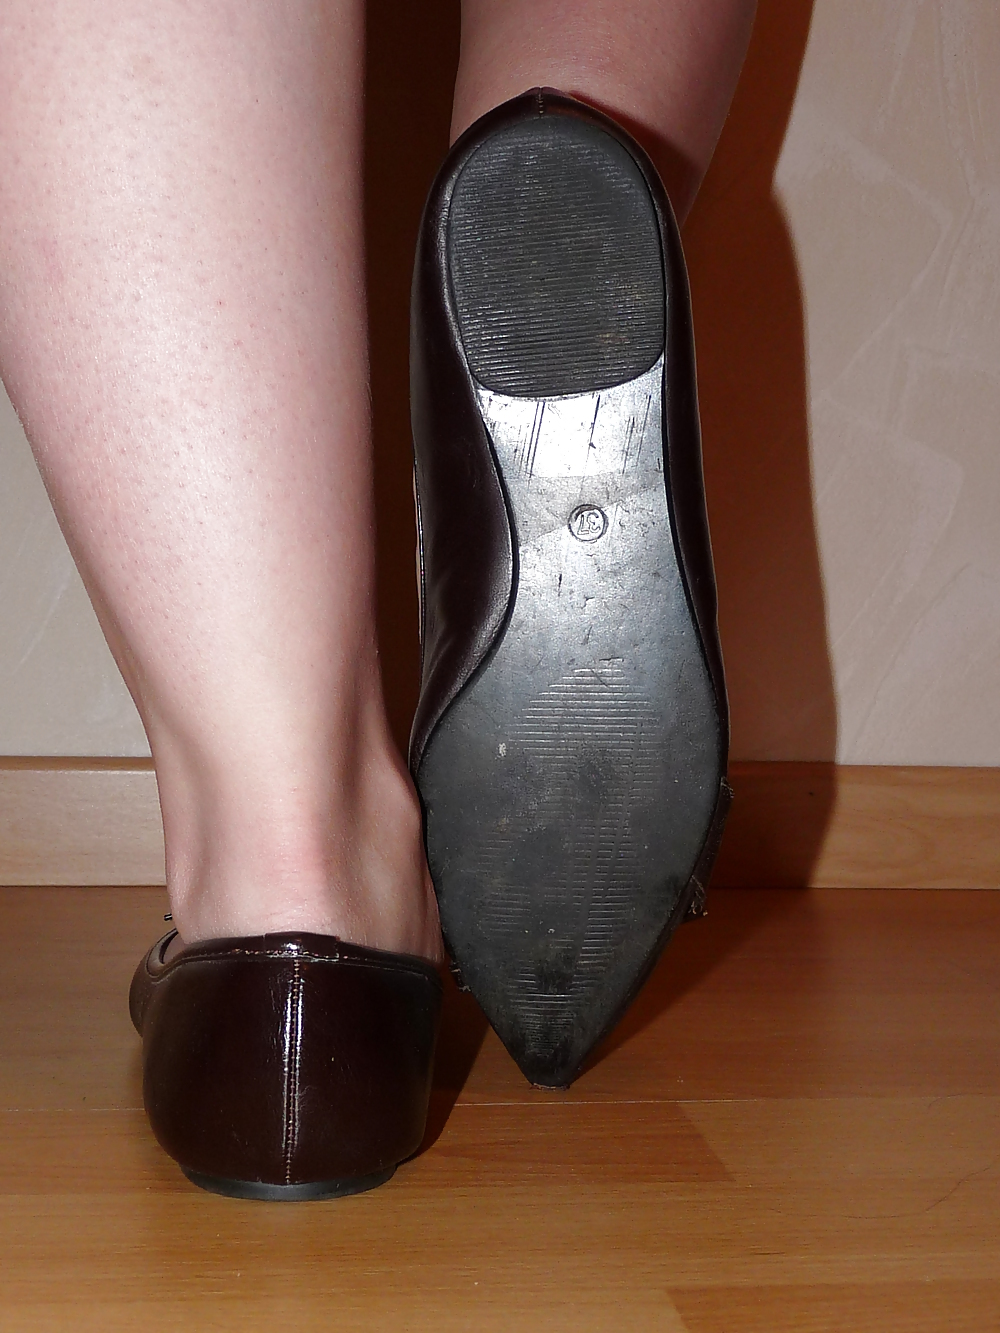 Wifes sexy black leather ballerina ballet flats shoes 2 #19330447